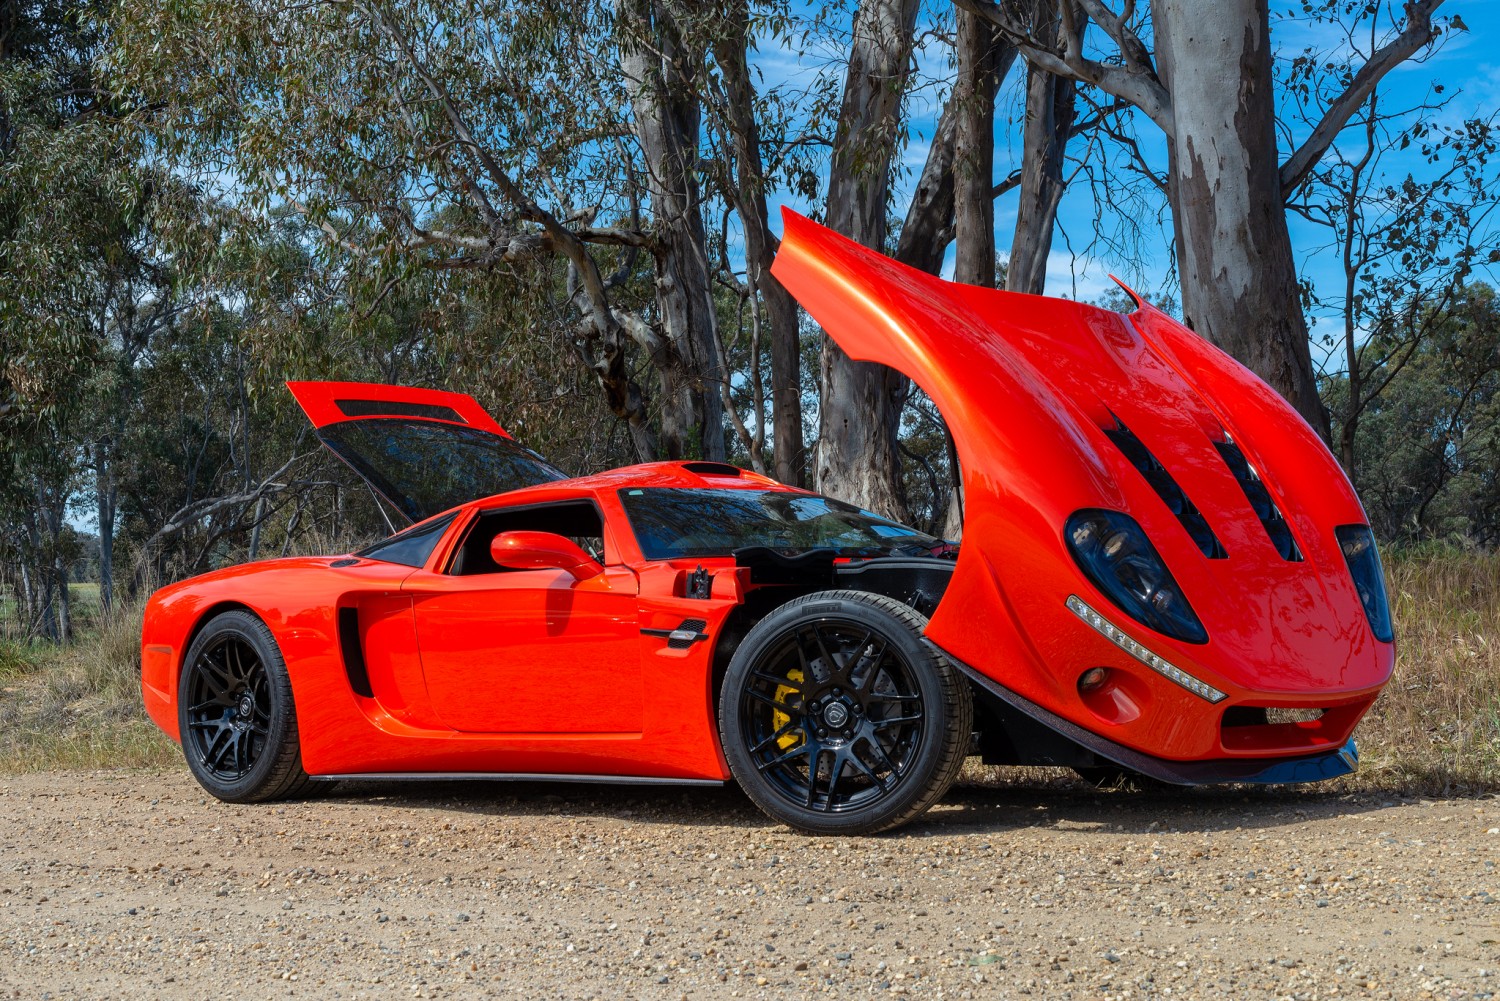 2014 Factory five racing GTM Supercar - Kenno71 - Shannons Club